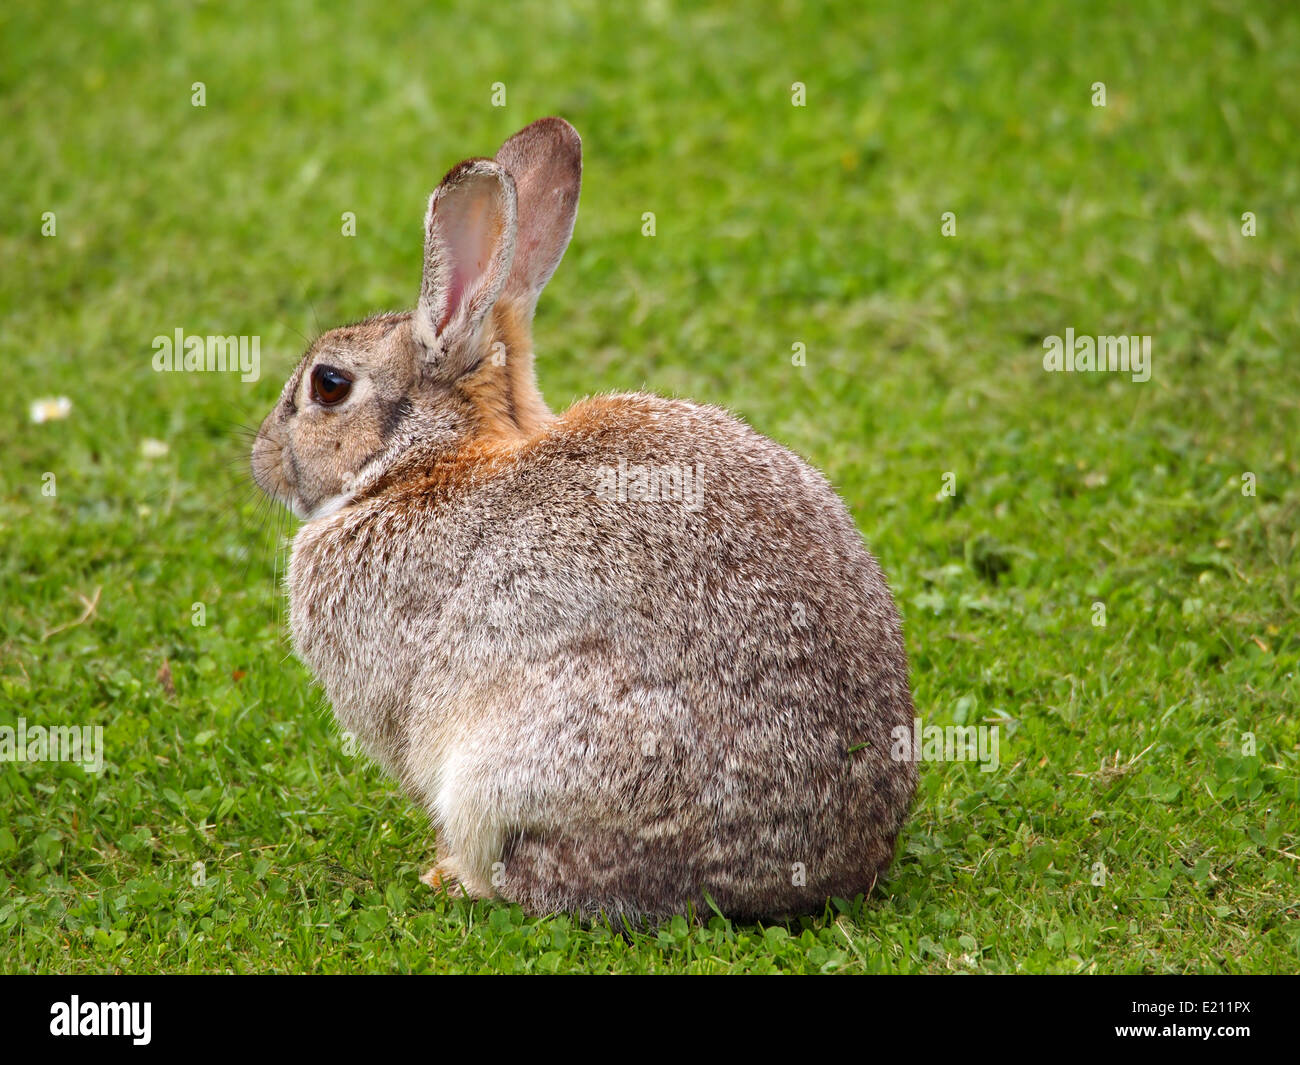 Rabbits in the wild on grass Stock Photo